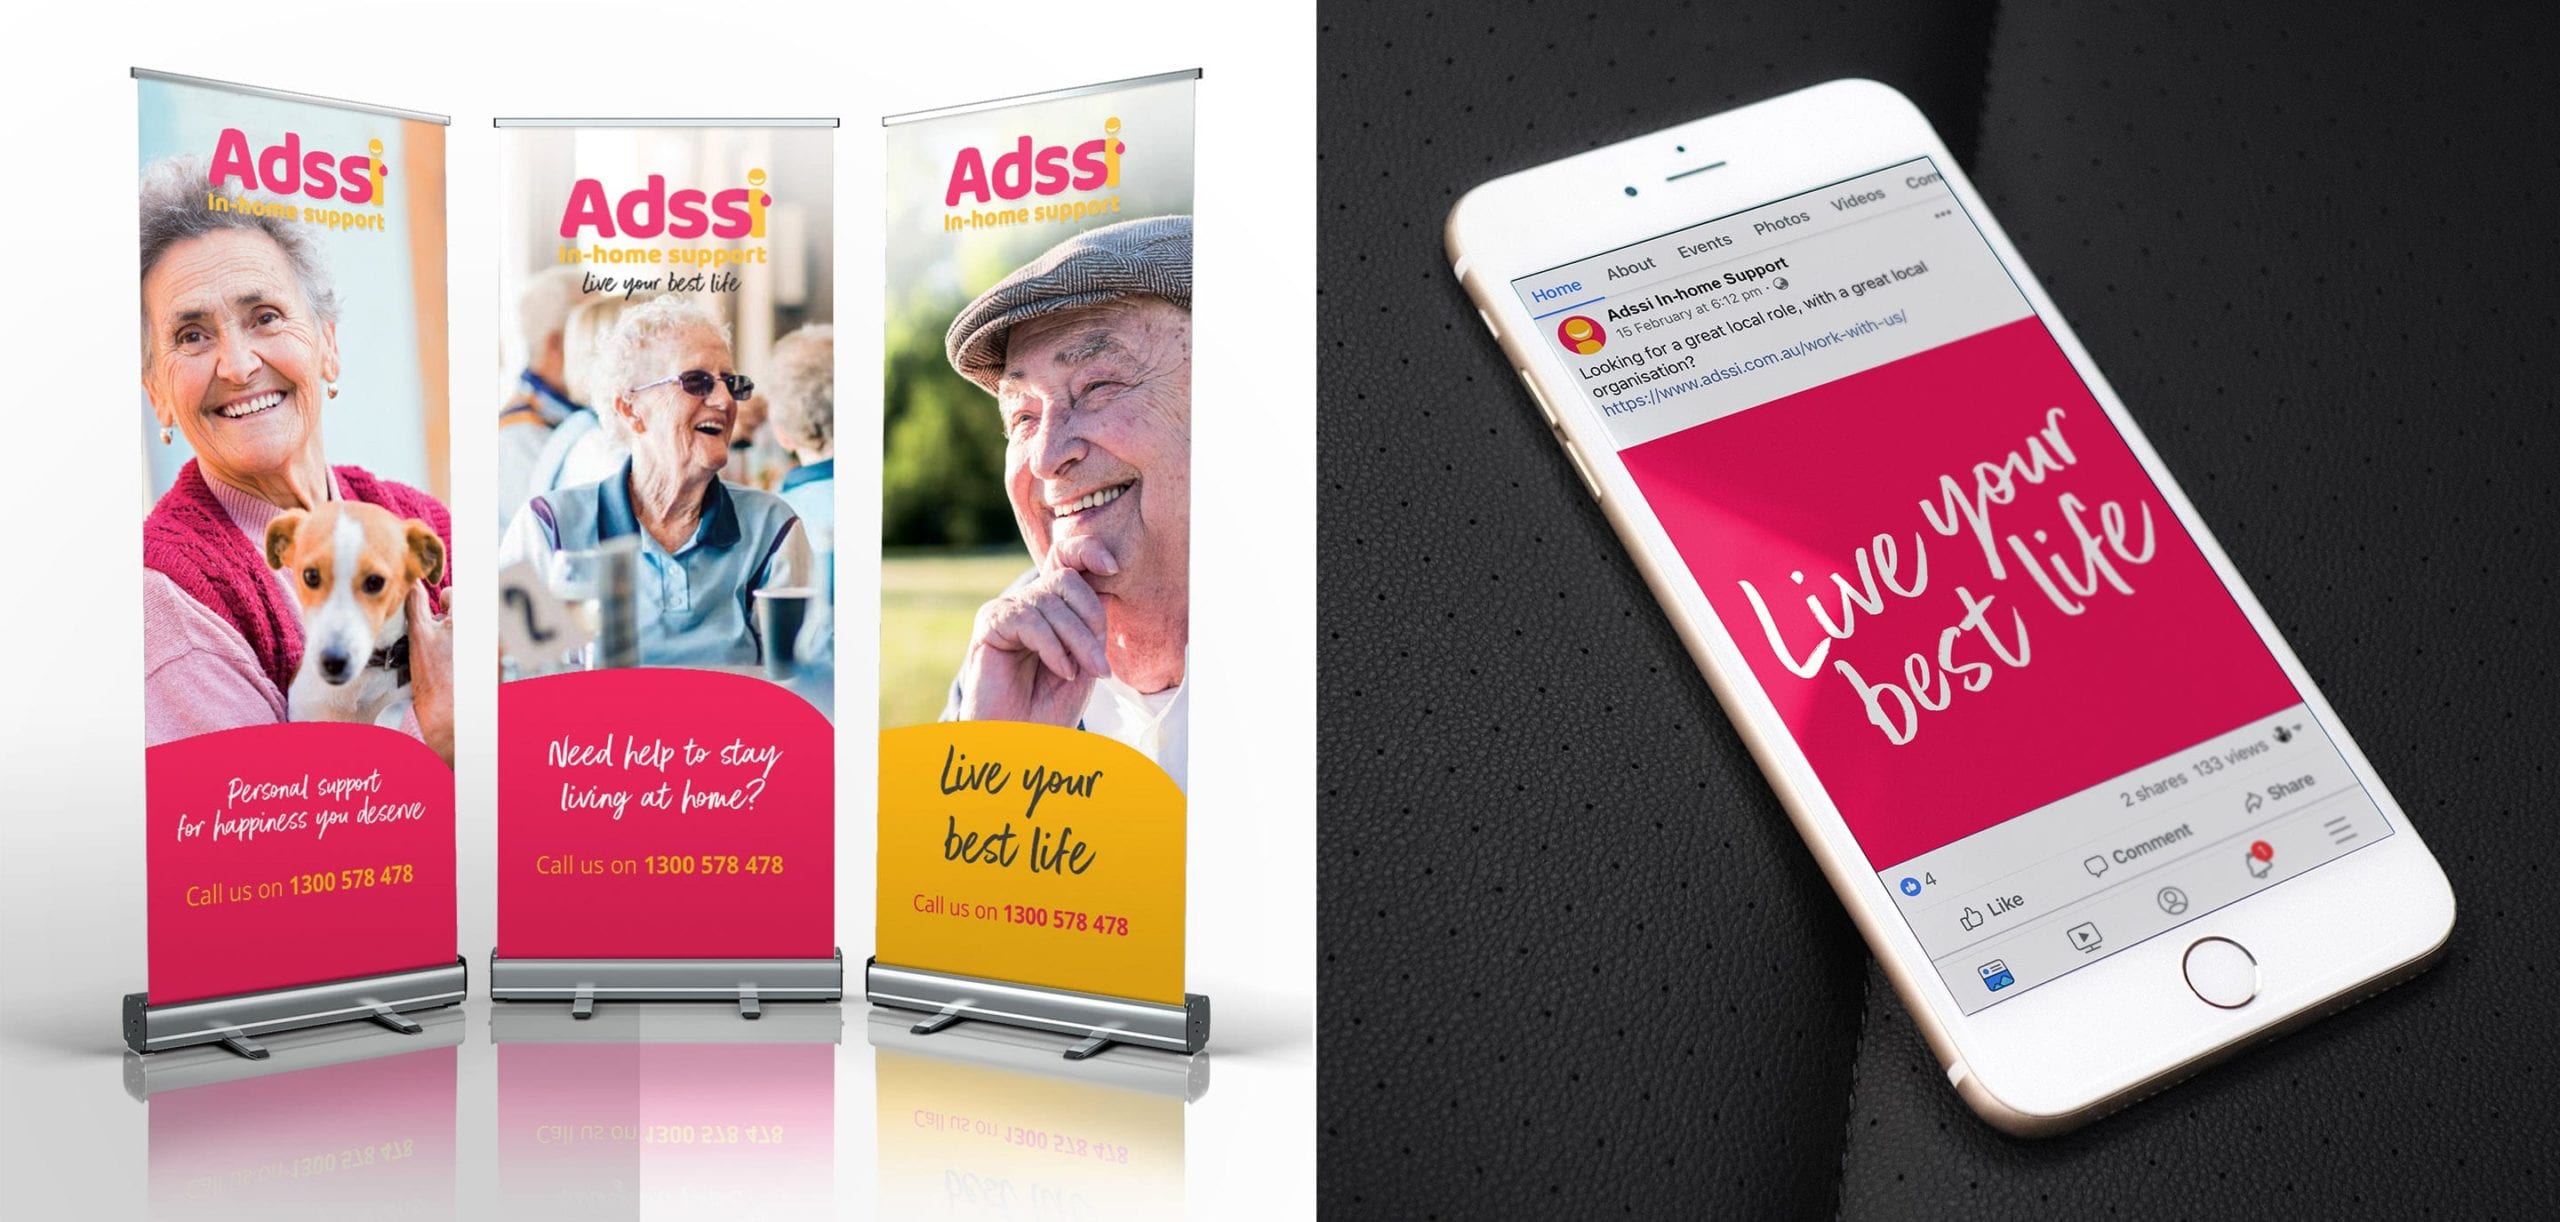 Adssi Rebrand Banners and Social